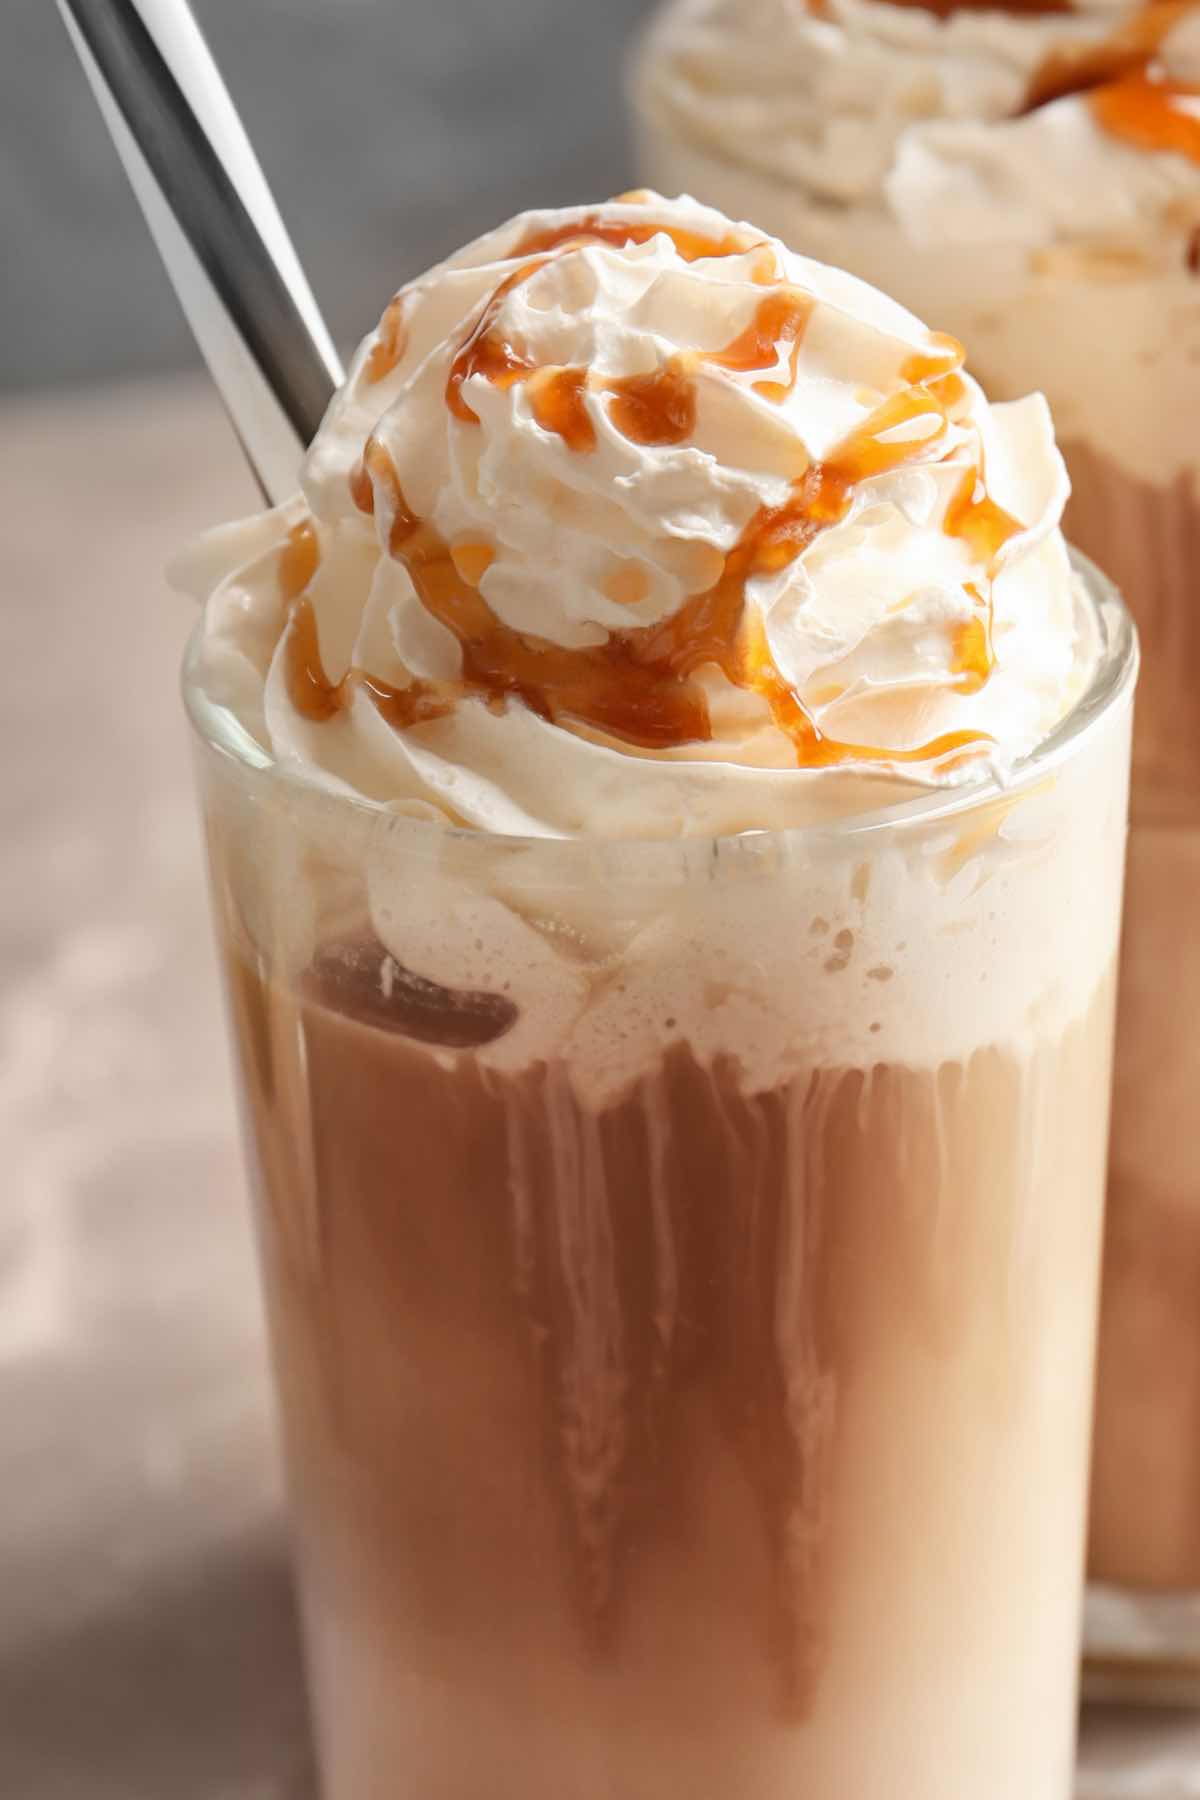 McDonald’s Frappe is creamy, chocolatey, with the whipped cream on top, drizzled with more caramel or chocolate sauce. This blended-ice copycat drink has a hint of coffee, perfect to cool you down on hot summer days. Plus, there are 3 different flavors you can try: caramel, mocha, or chocolate chip.